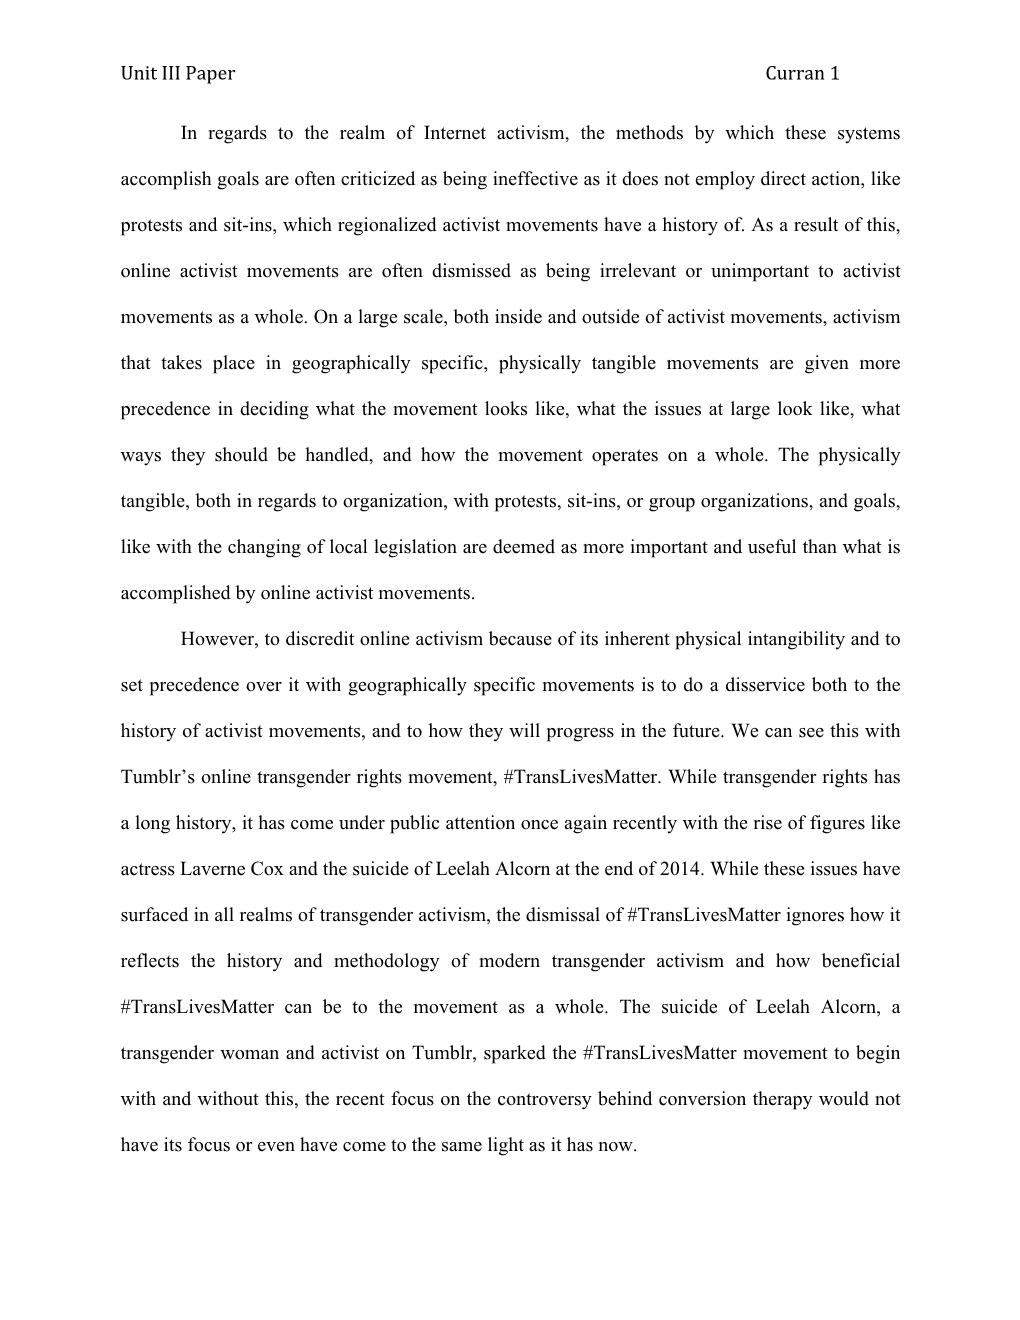 Unit III Paper Curran 1 in Regards to the Realm of Internet Activism, The